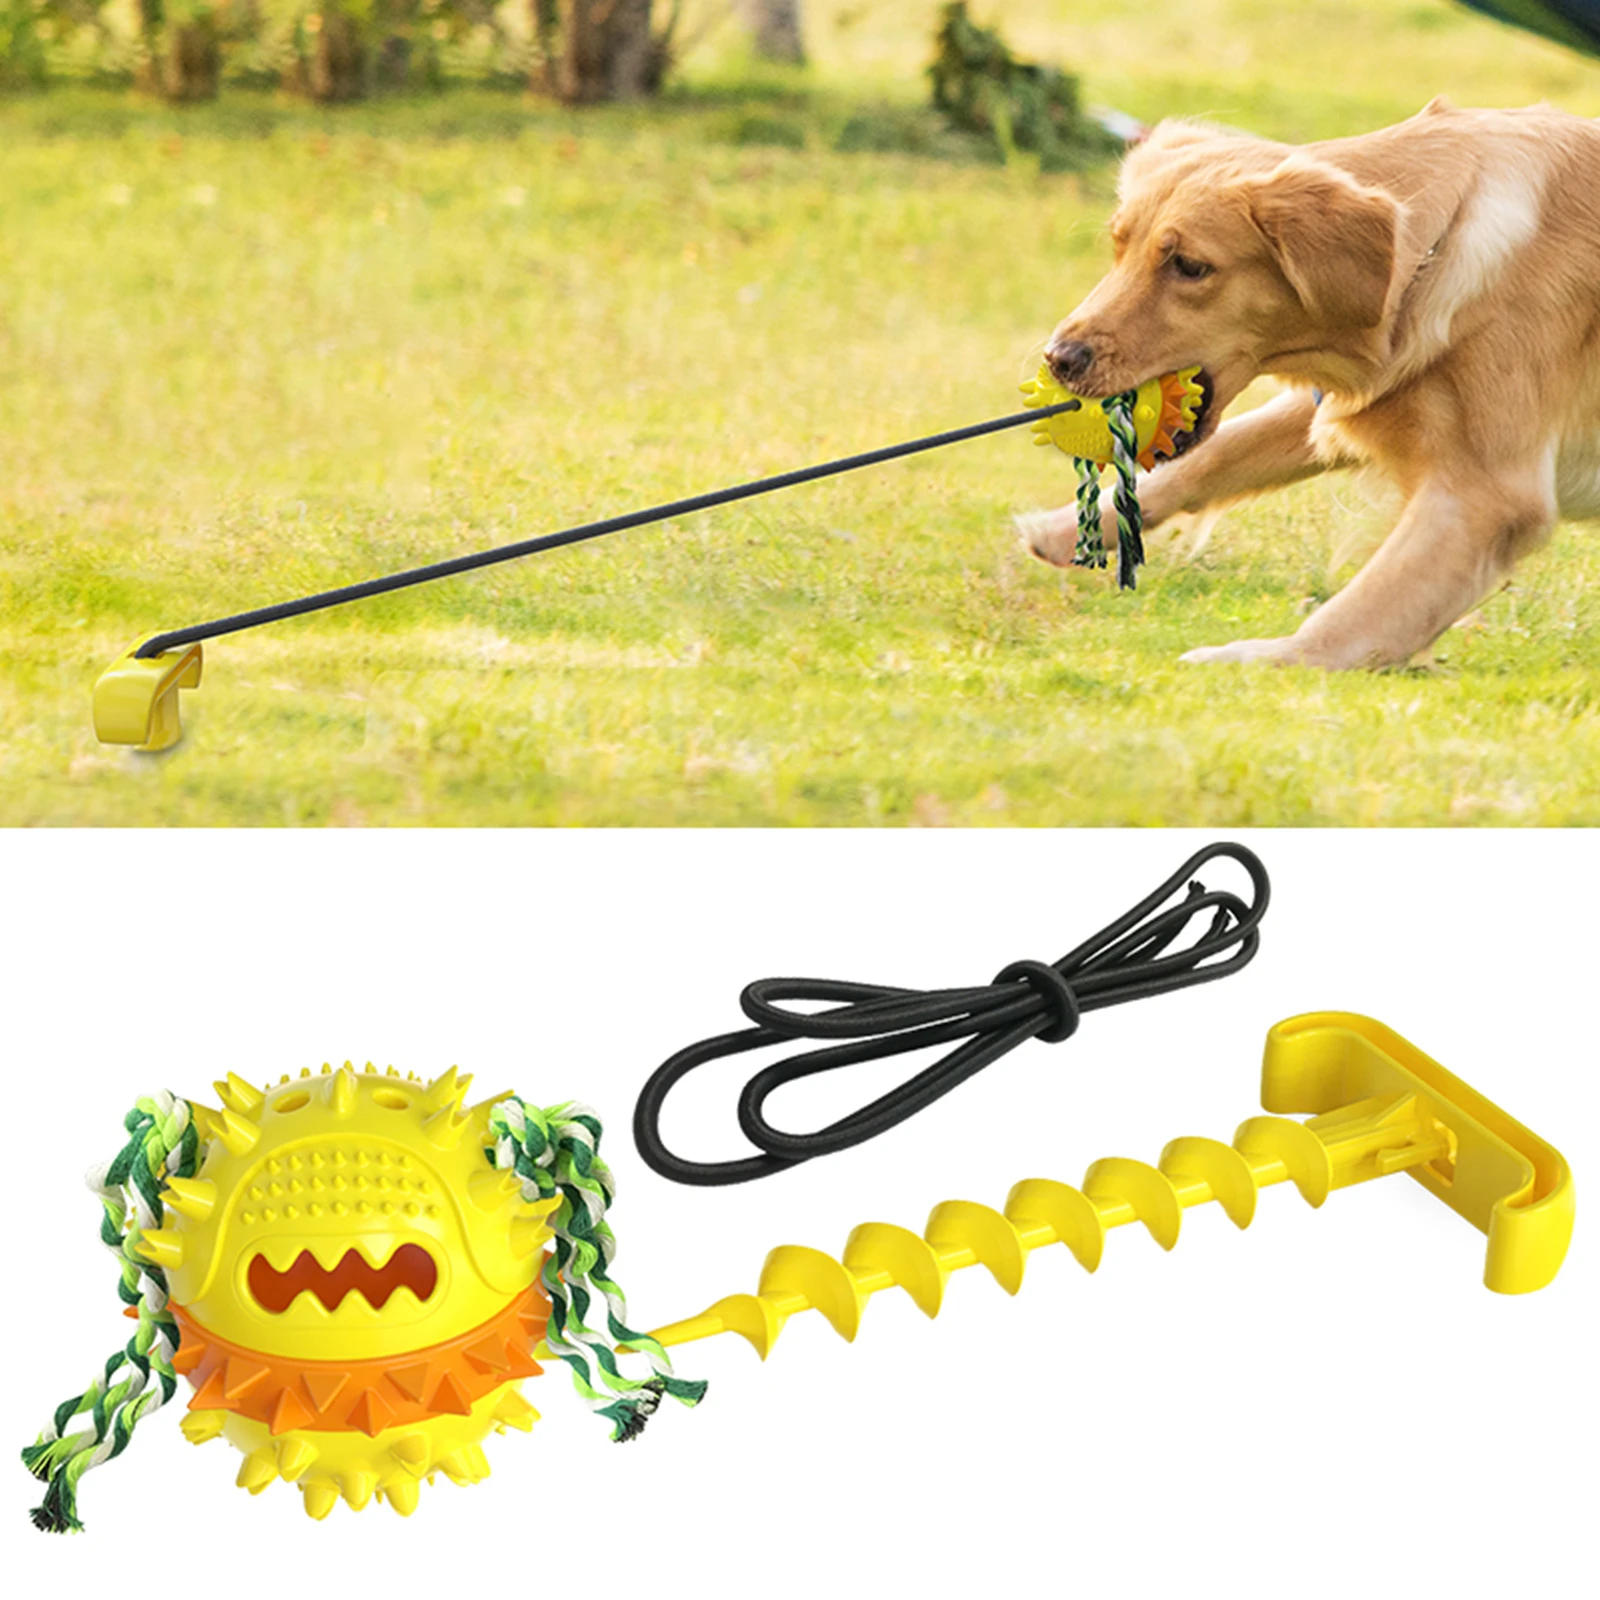 Wholesaler Customize Dental Care Durable Resistant Bite Dog Rope Ball Pull Toy